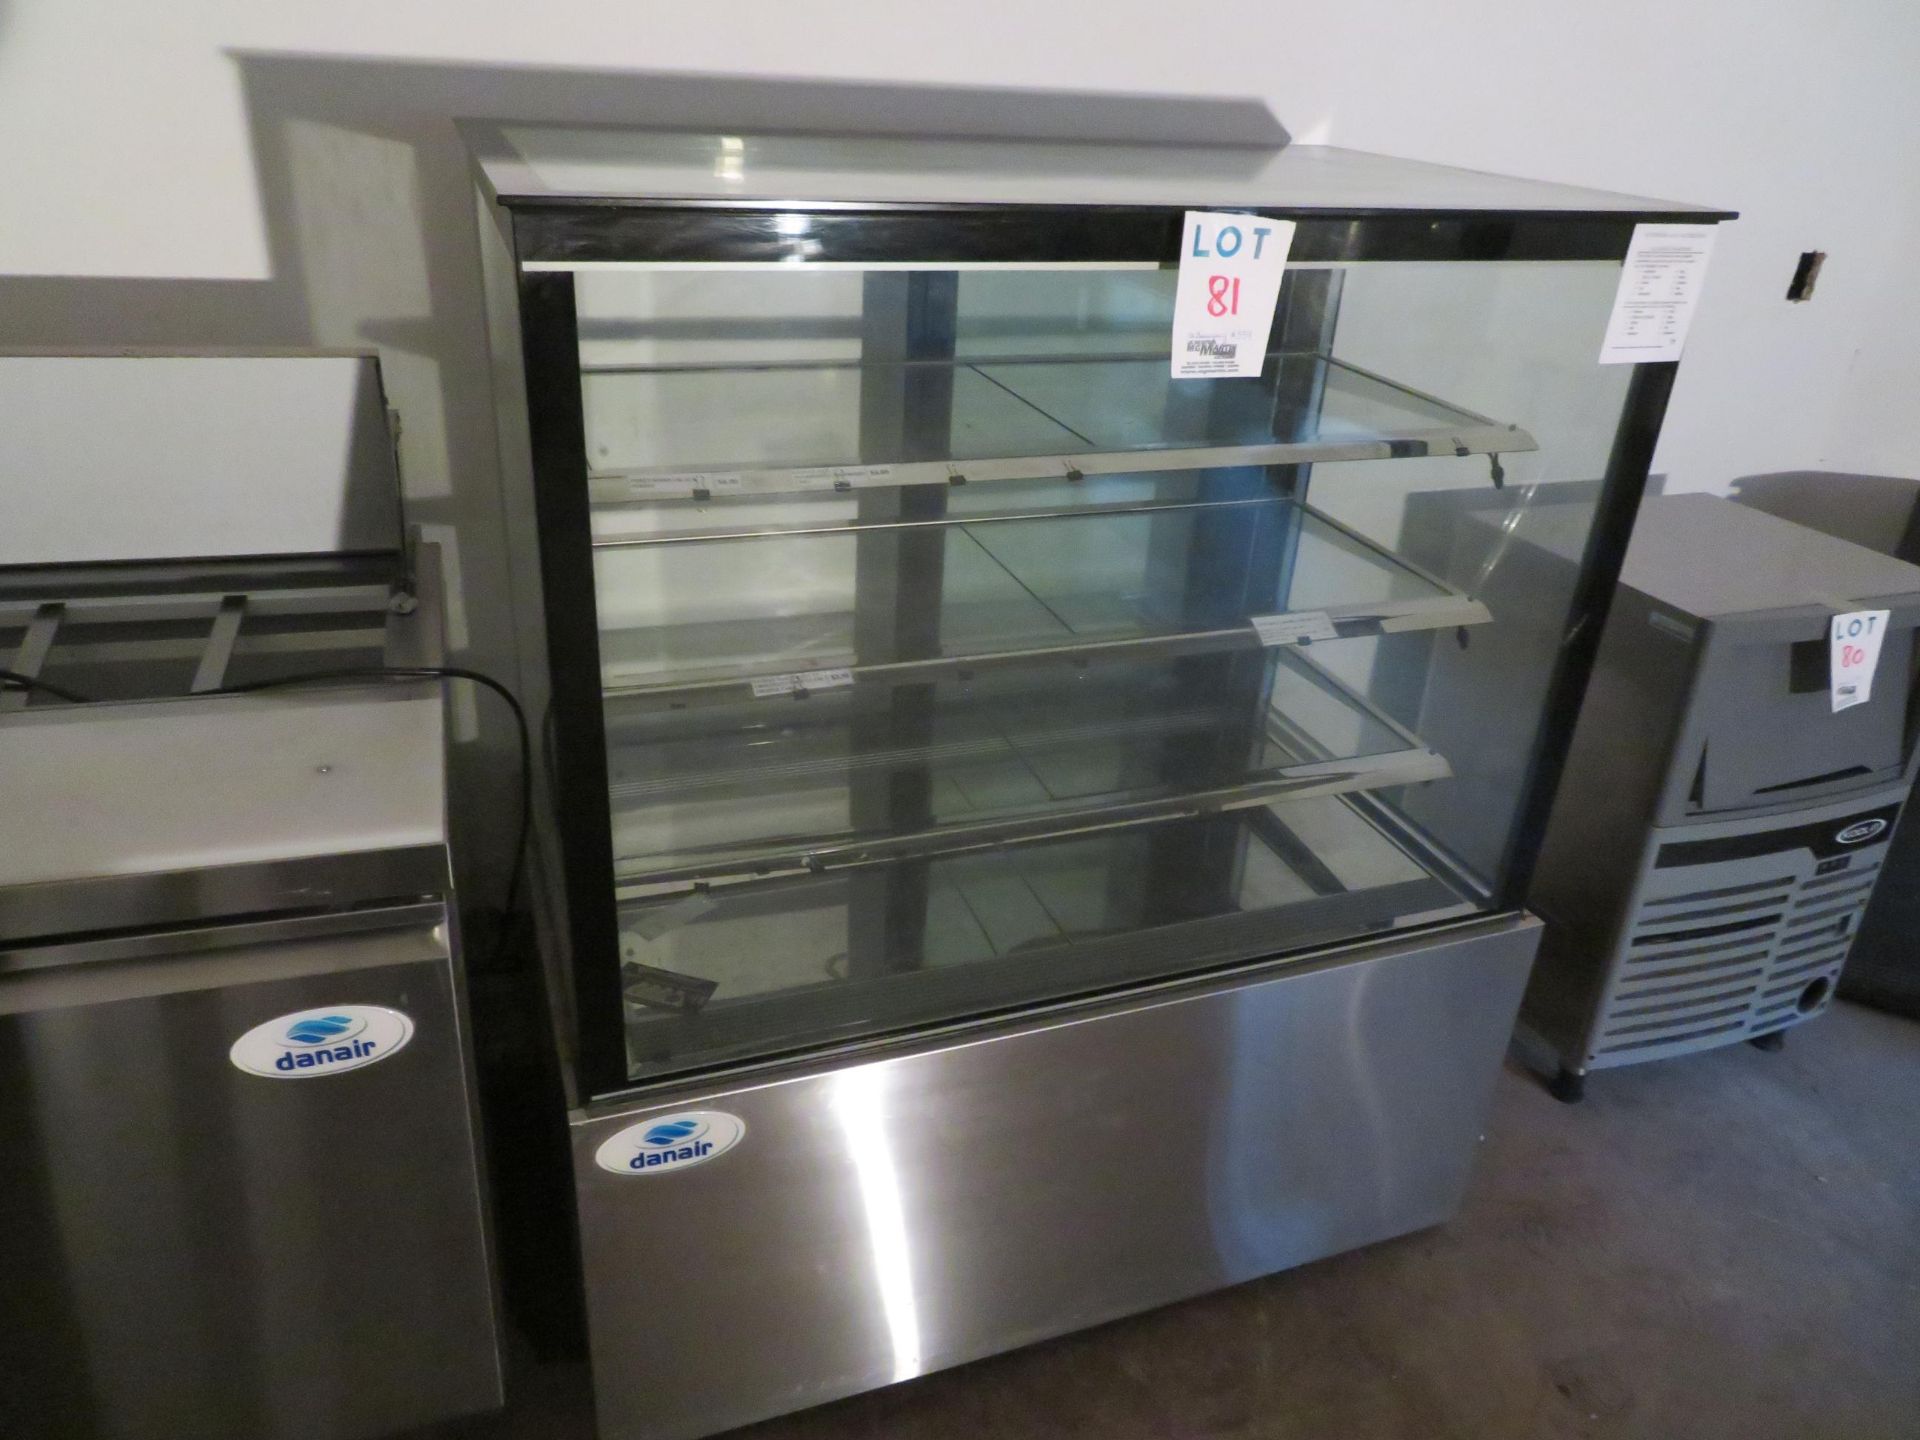 DANAIR refrigerated glass display unit, Mod # CD-48, approx. 46"w x 28"d x 55"h - Image 2 of 2